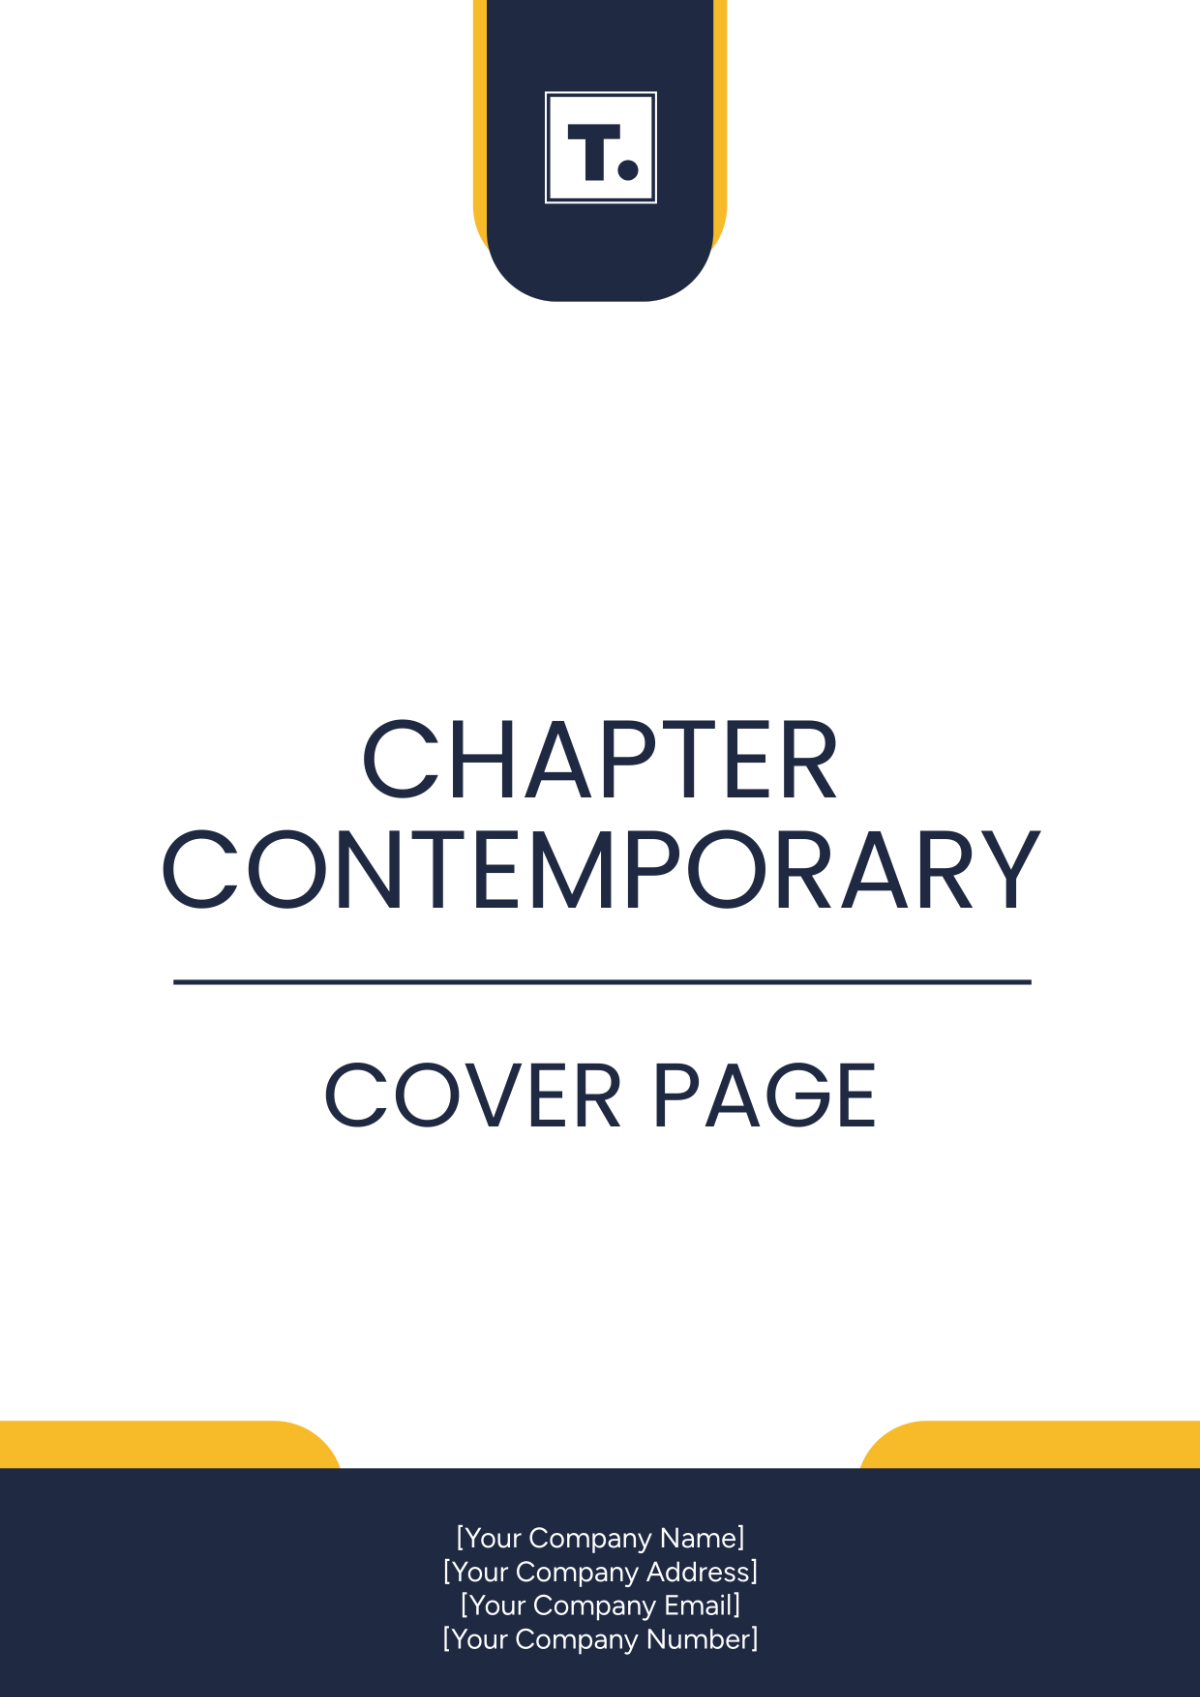 Chapter Contemporary Cover Page